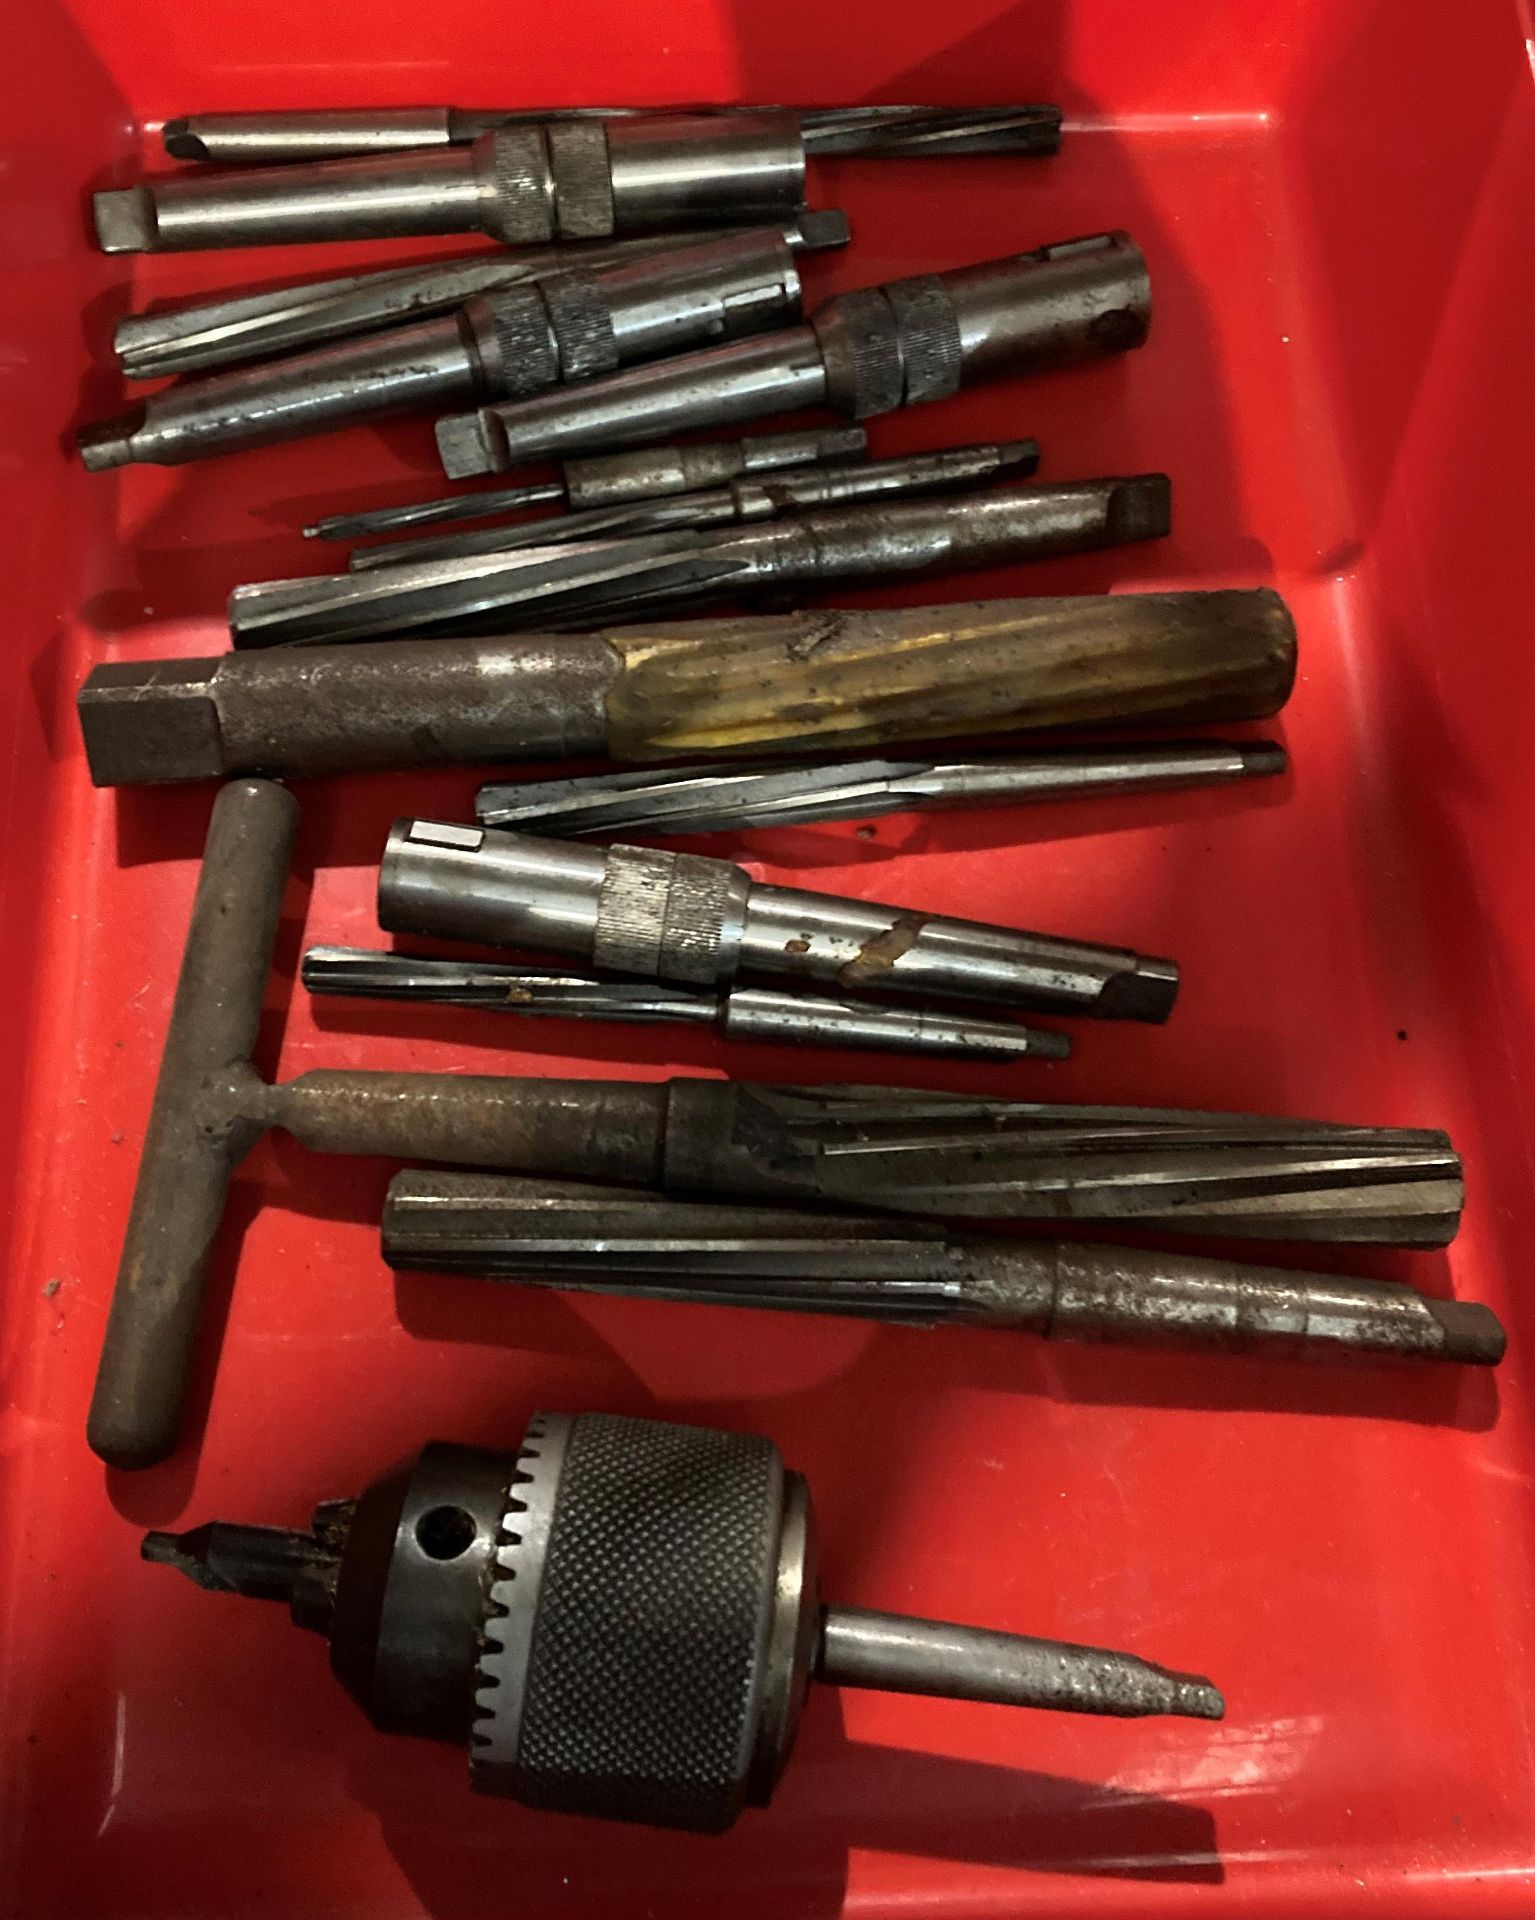 Contents to tray - 14 assorted milling bits and a Galex chuck/cap 1/8-5/8 with tapered end - Image 2 of 2